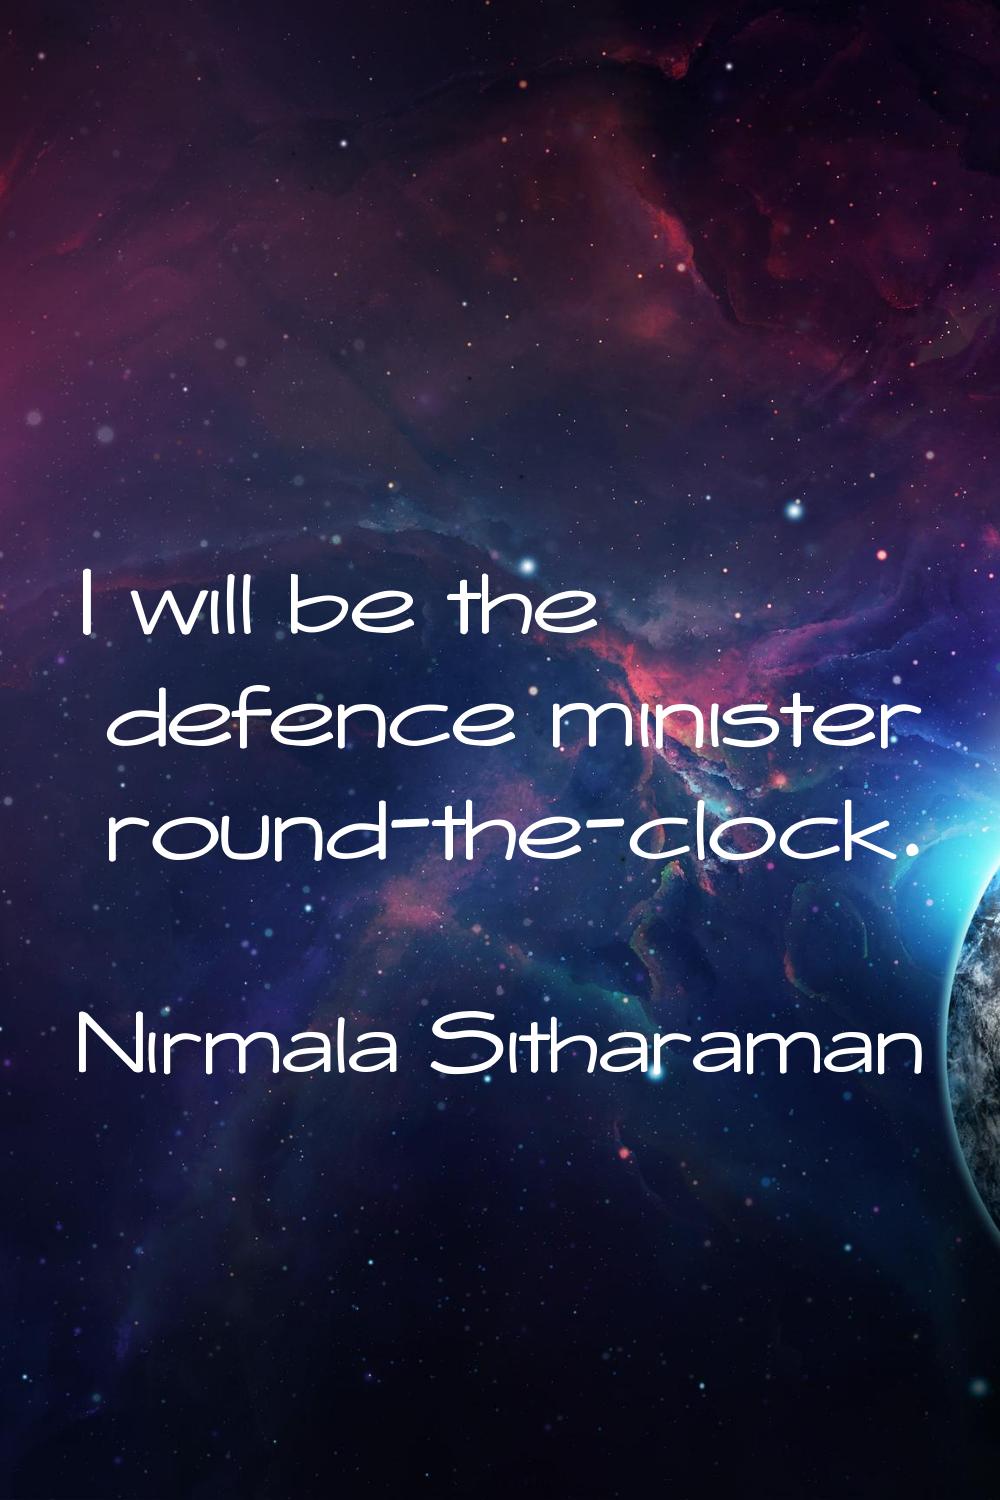 I will be the defence minister round-the-clock.